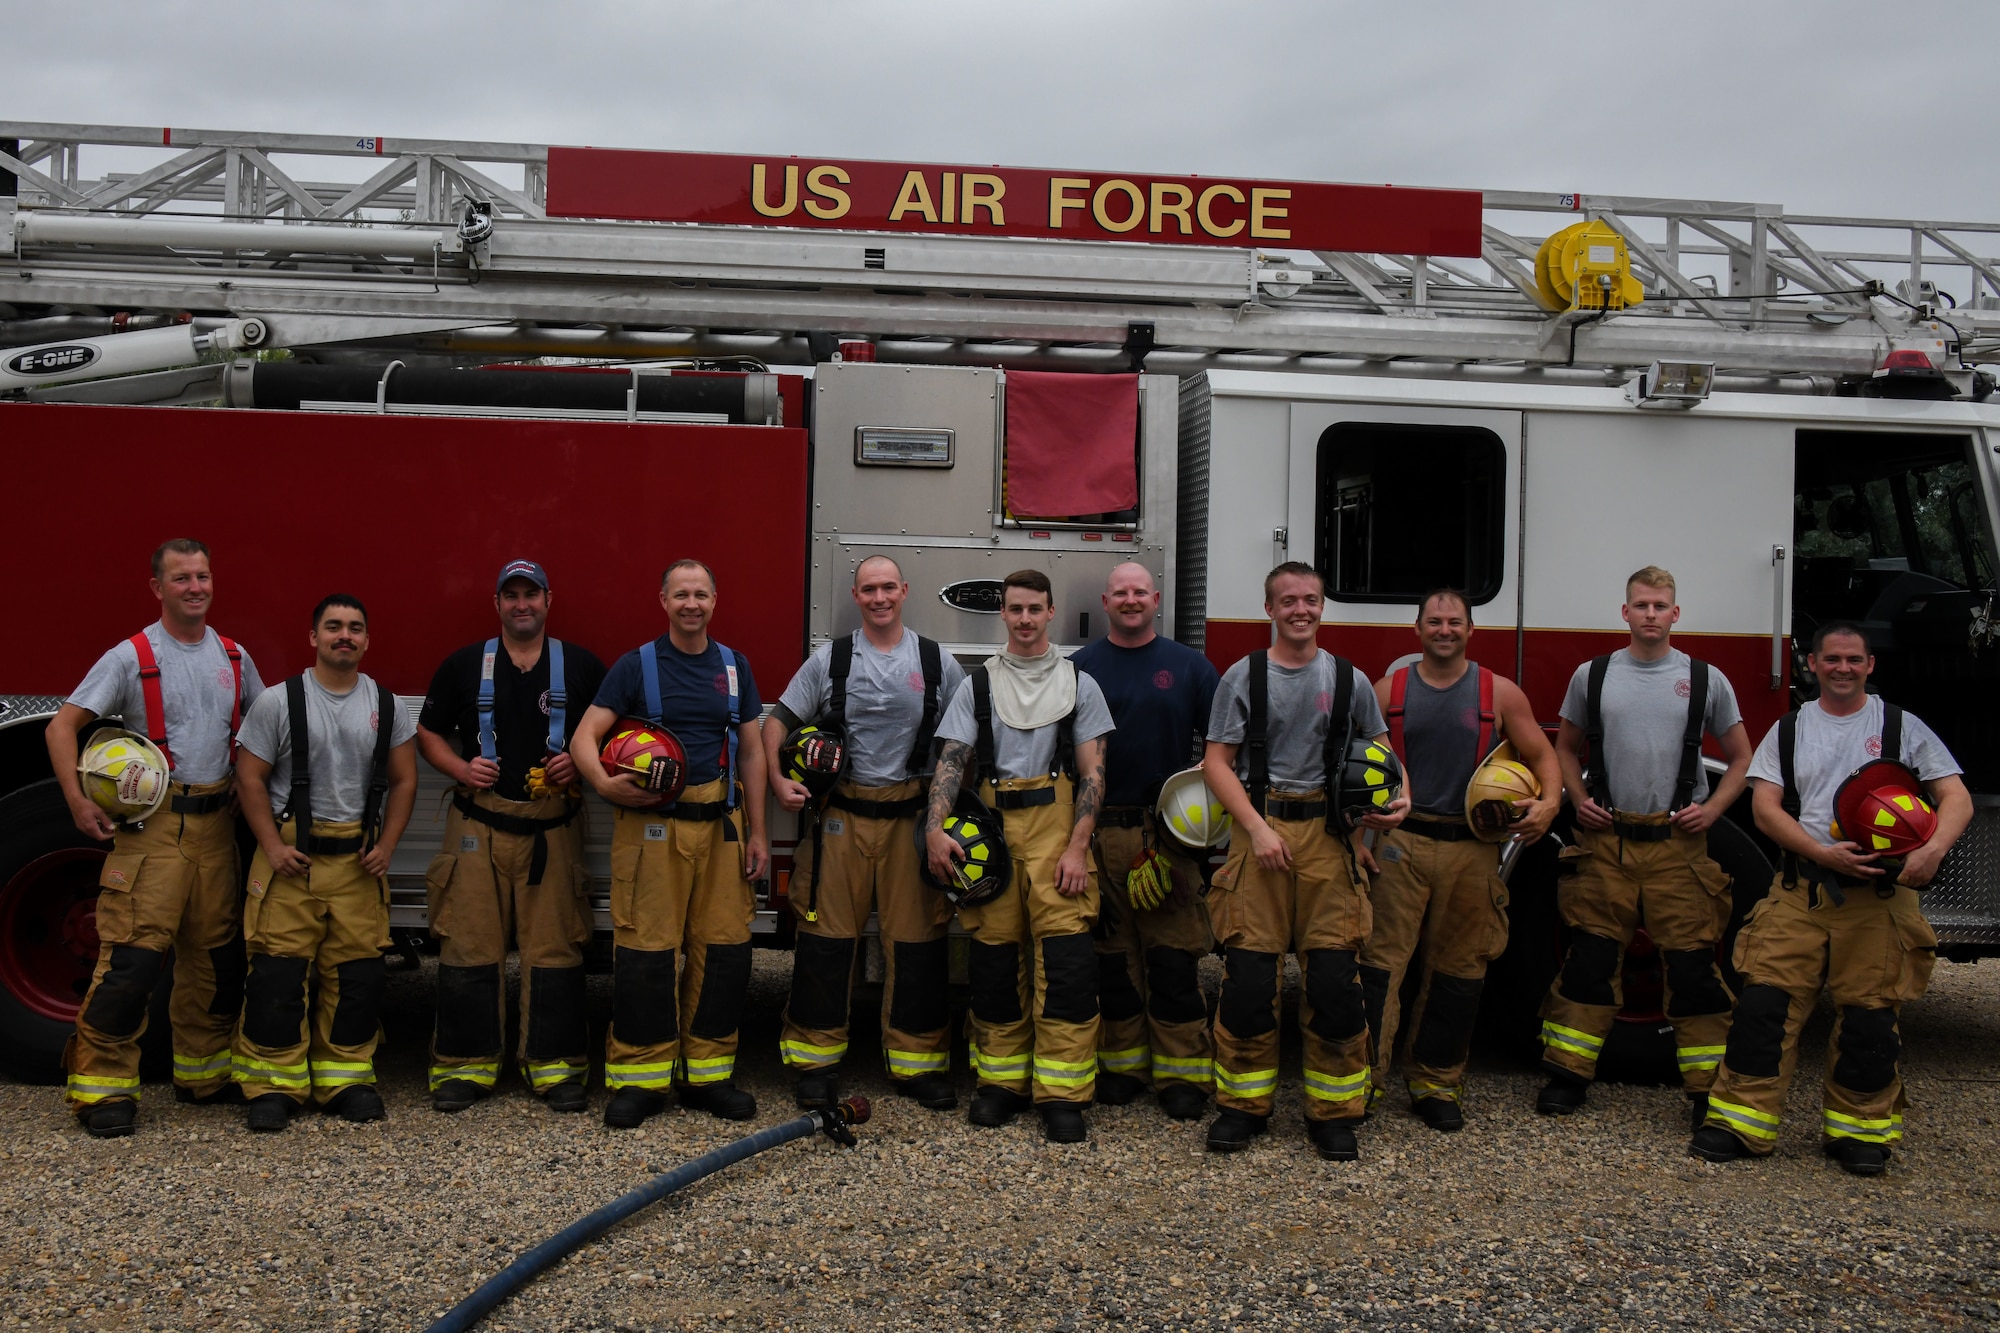 A group of firefighters pose for a picture.